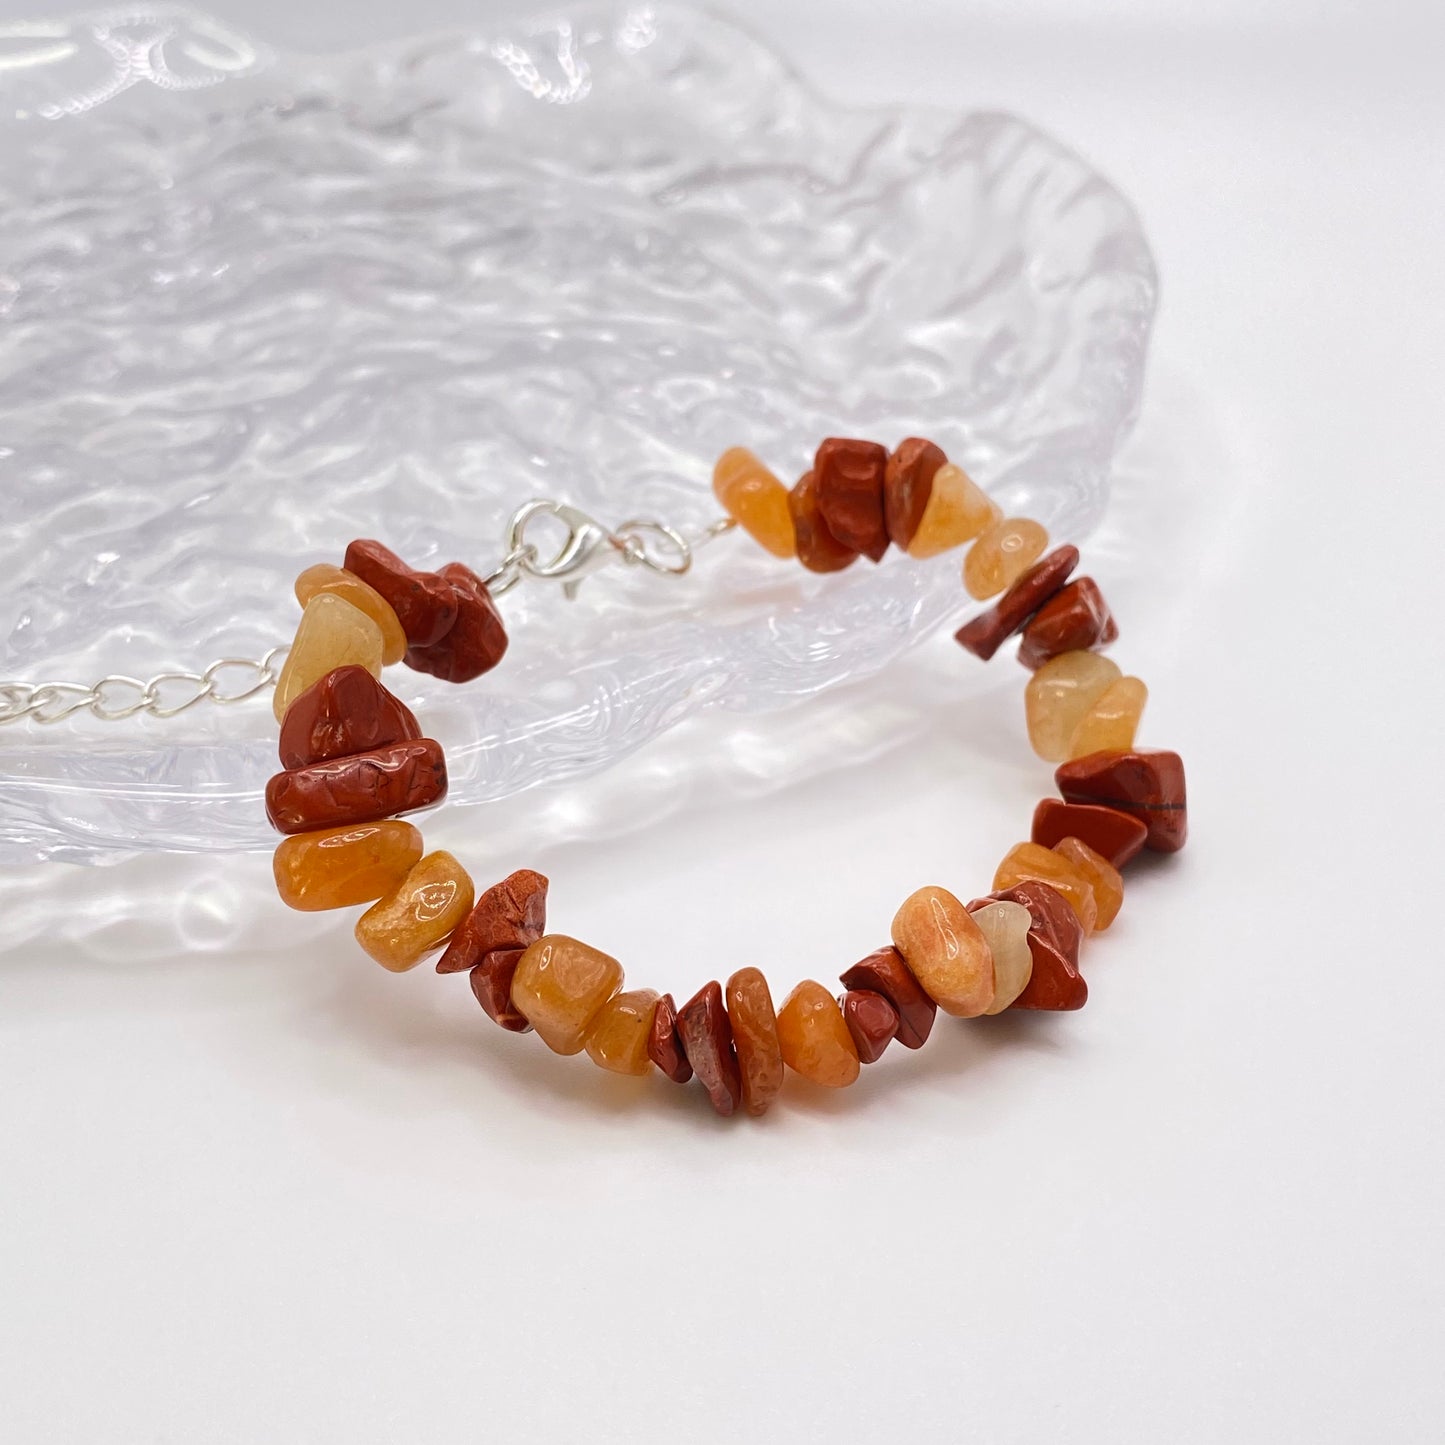 Yellow Agate and Red Jasper Crystal Bracelet